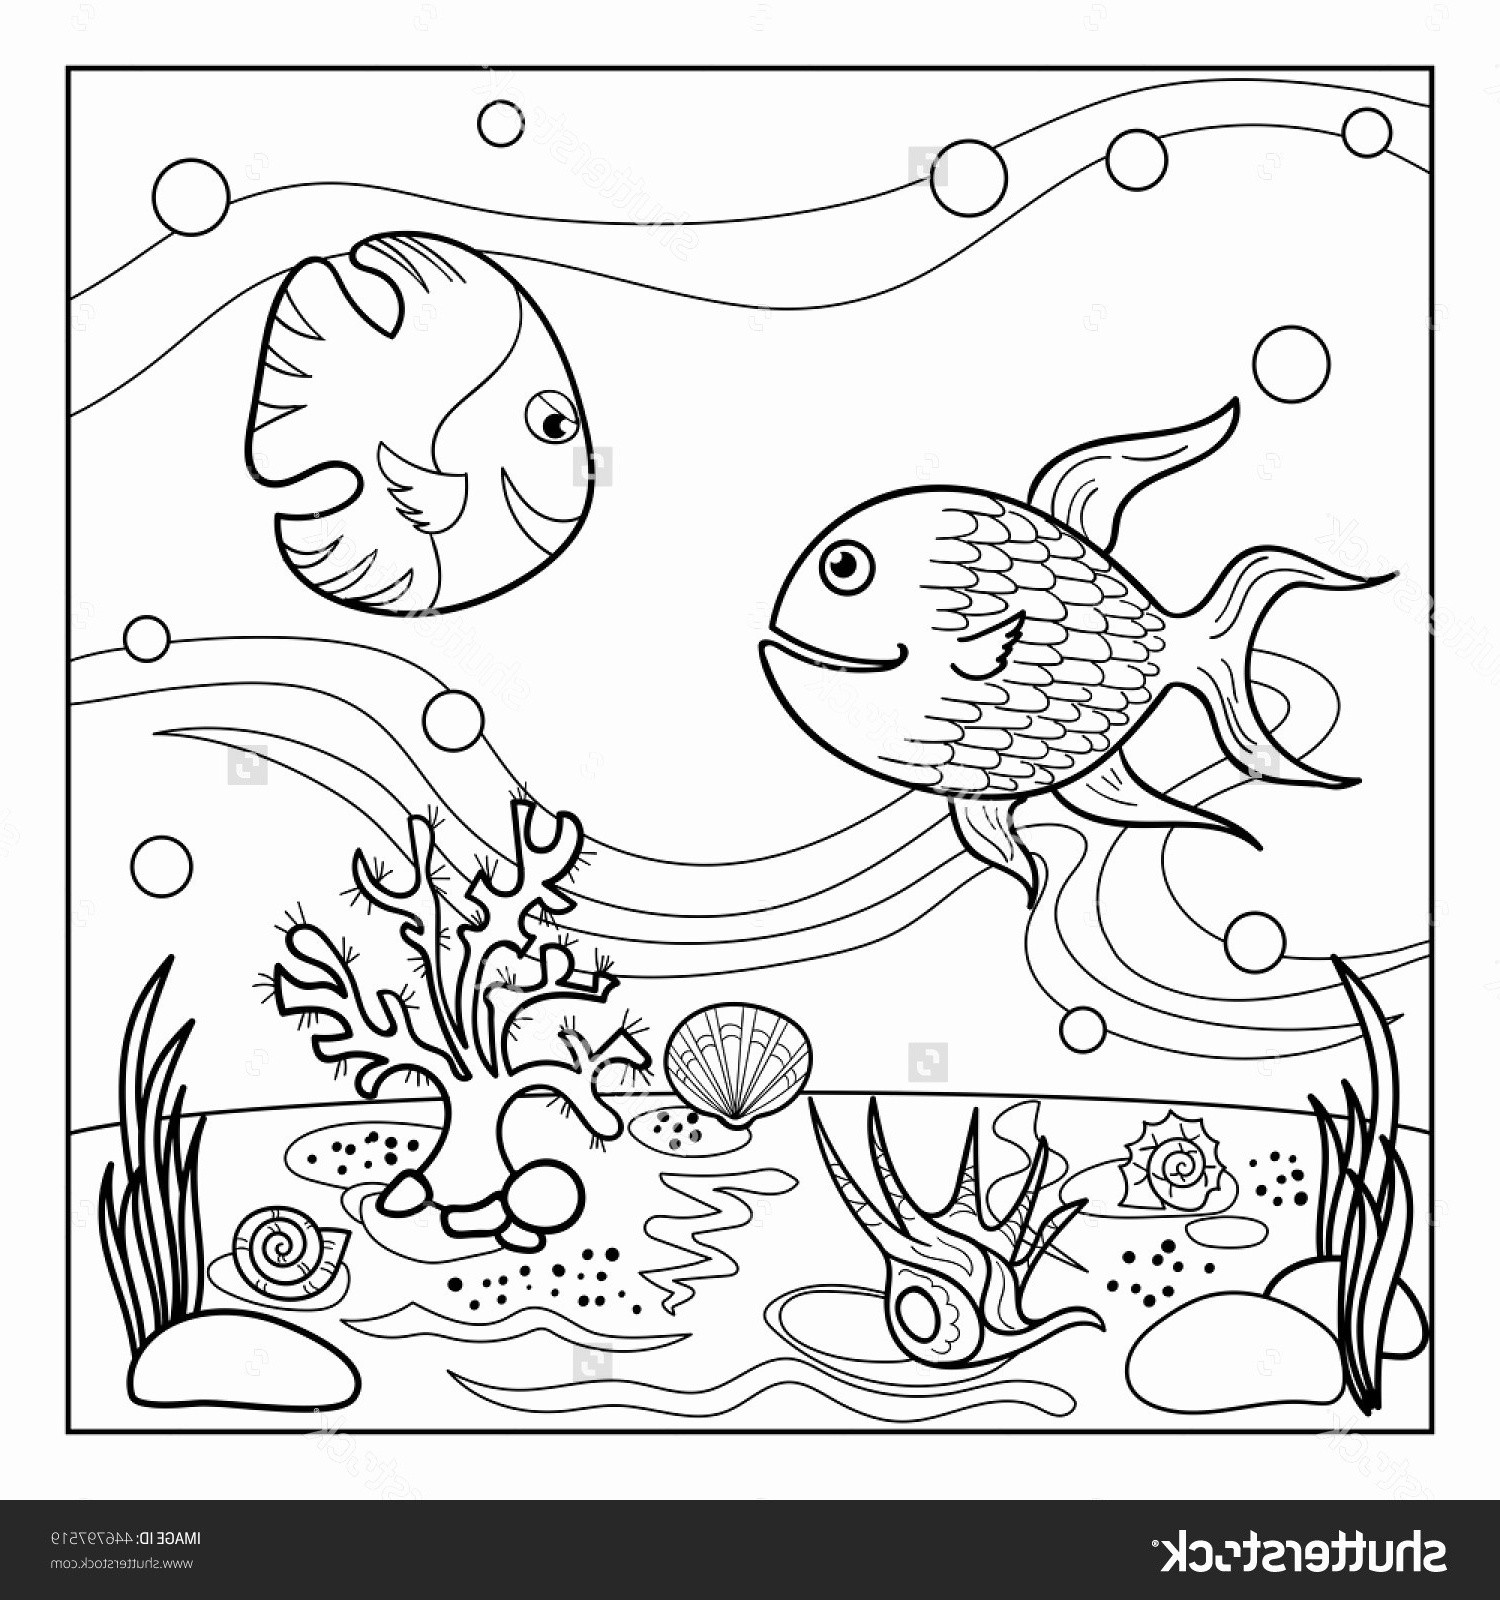 farm animals coloring picture new images animal farm awesome free color sheets animals inspirational funny of farm animals coloring picture